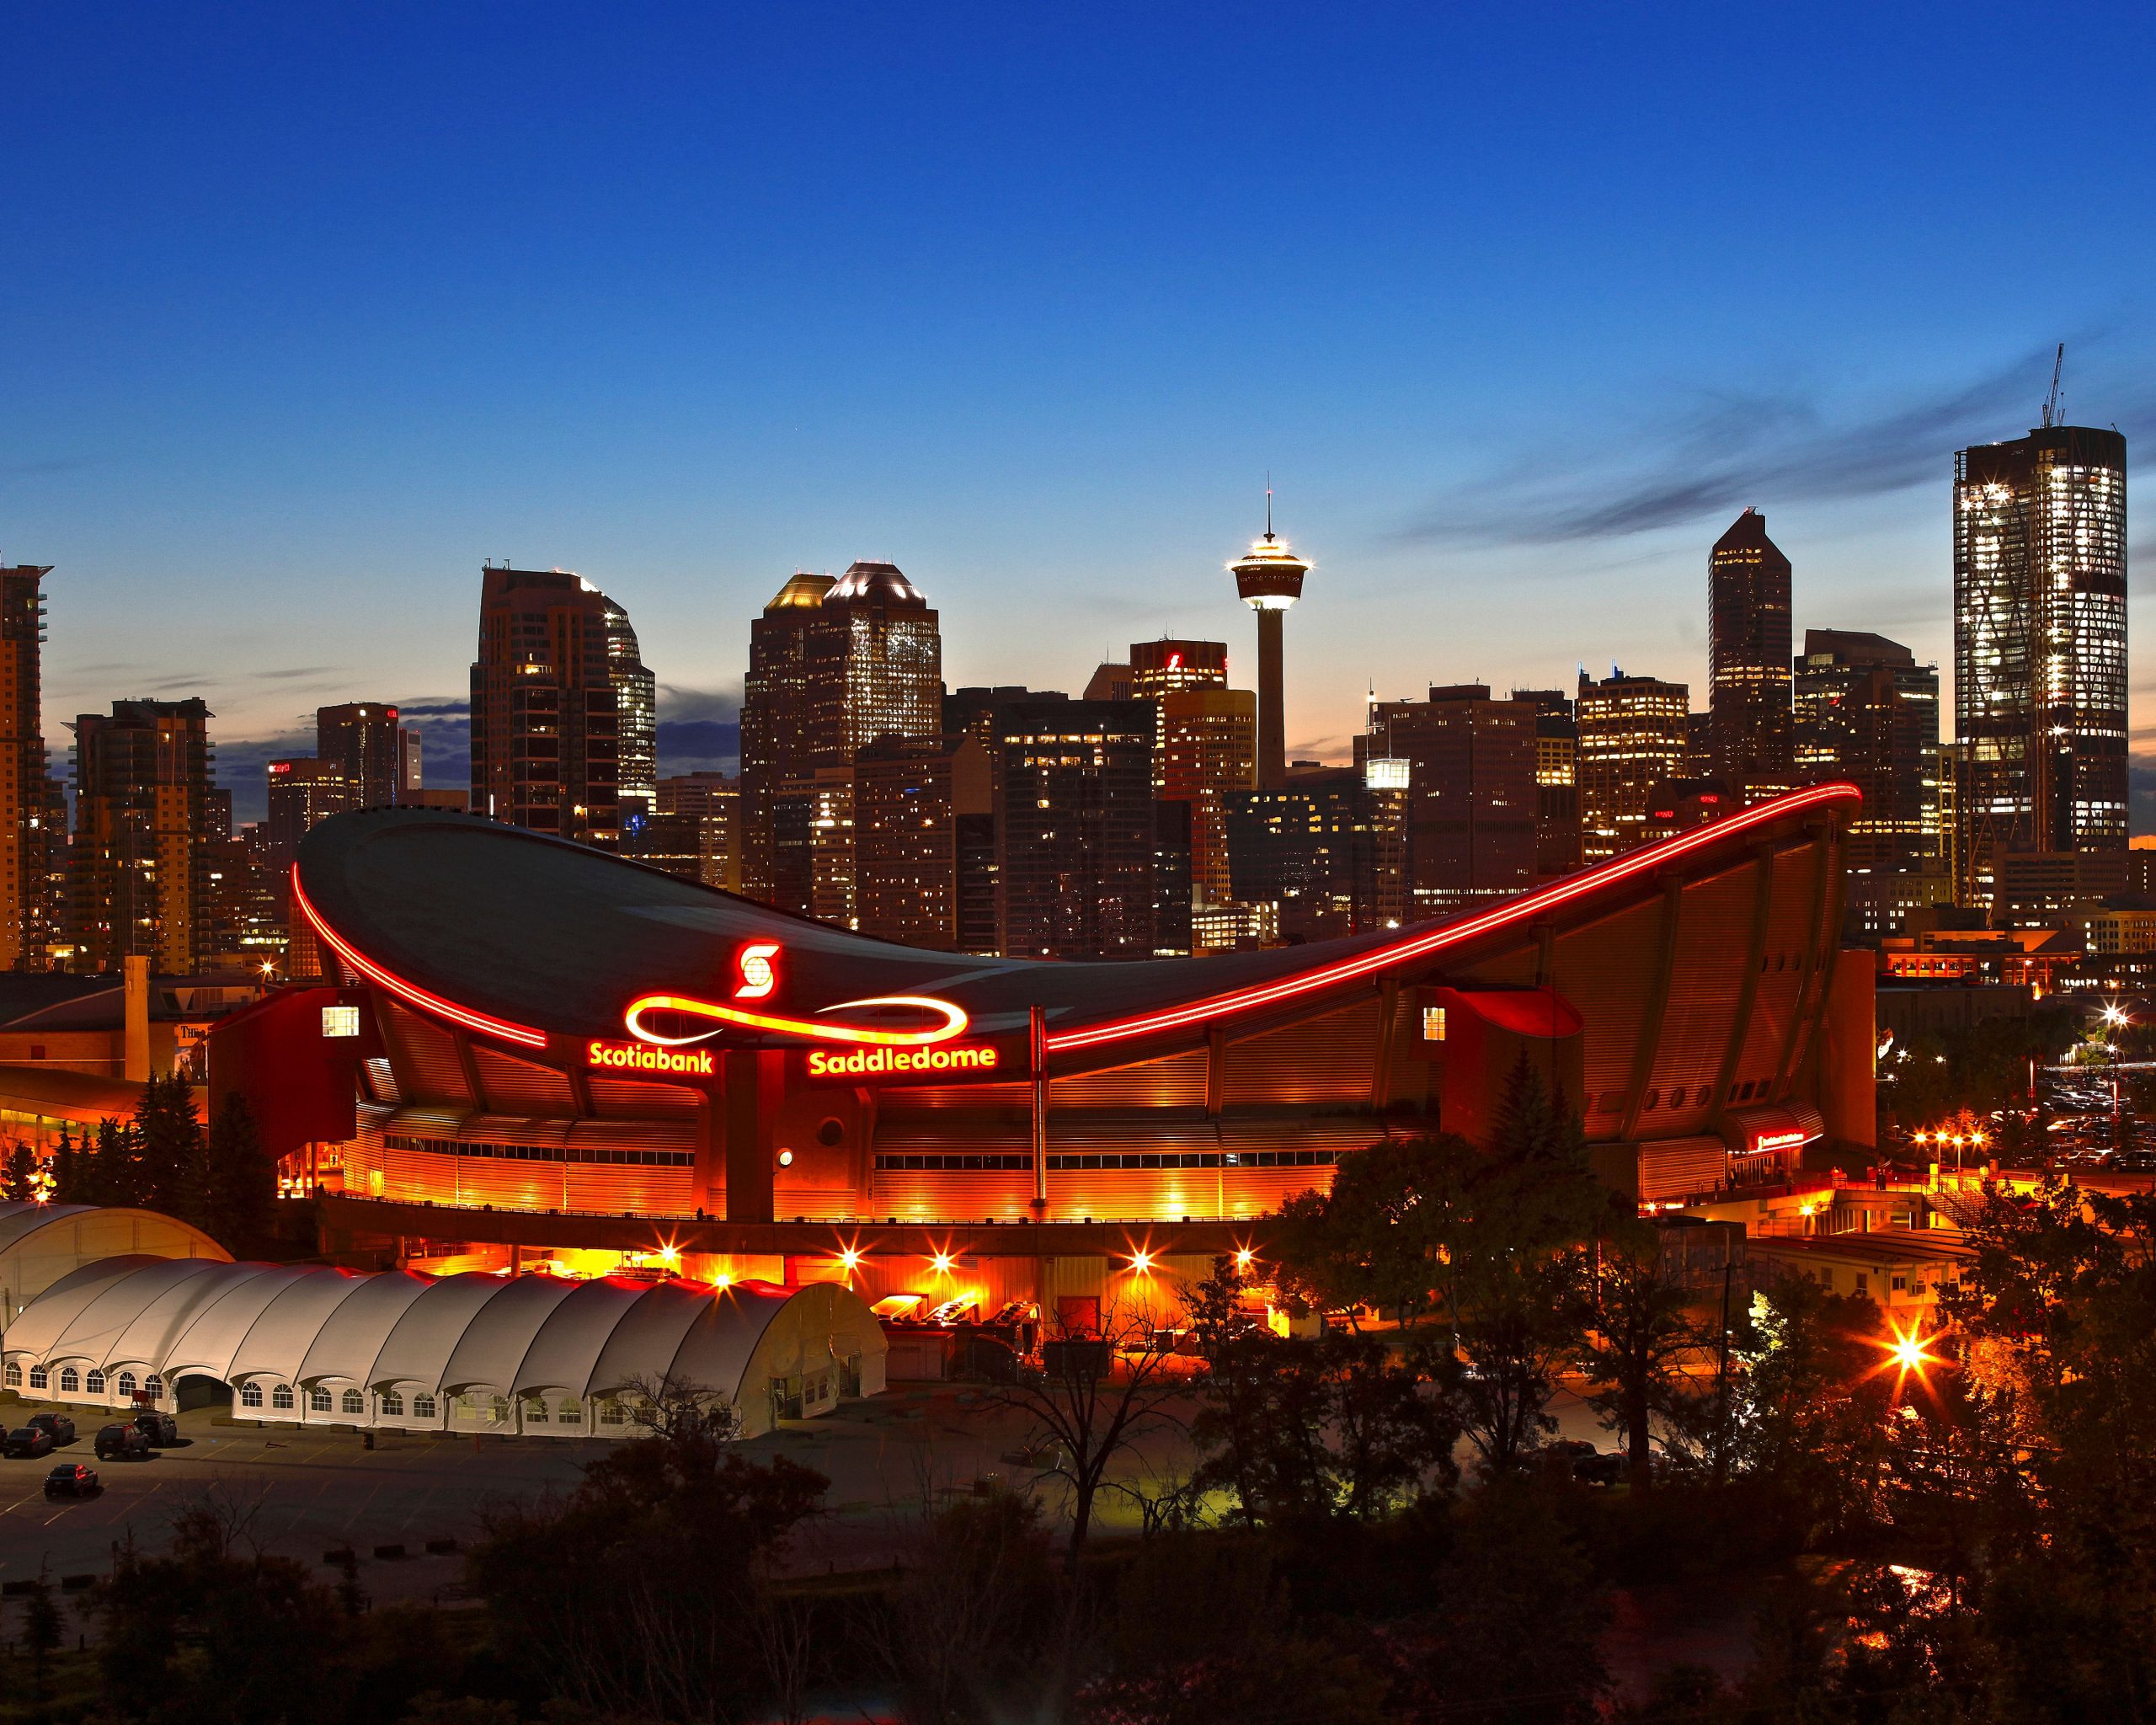 Scotiabank Saddledome in the foreground, downtown Calgary in the background during the evening